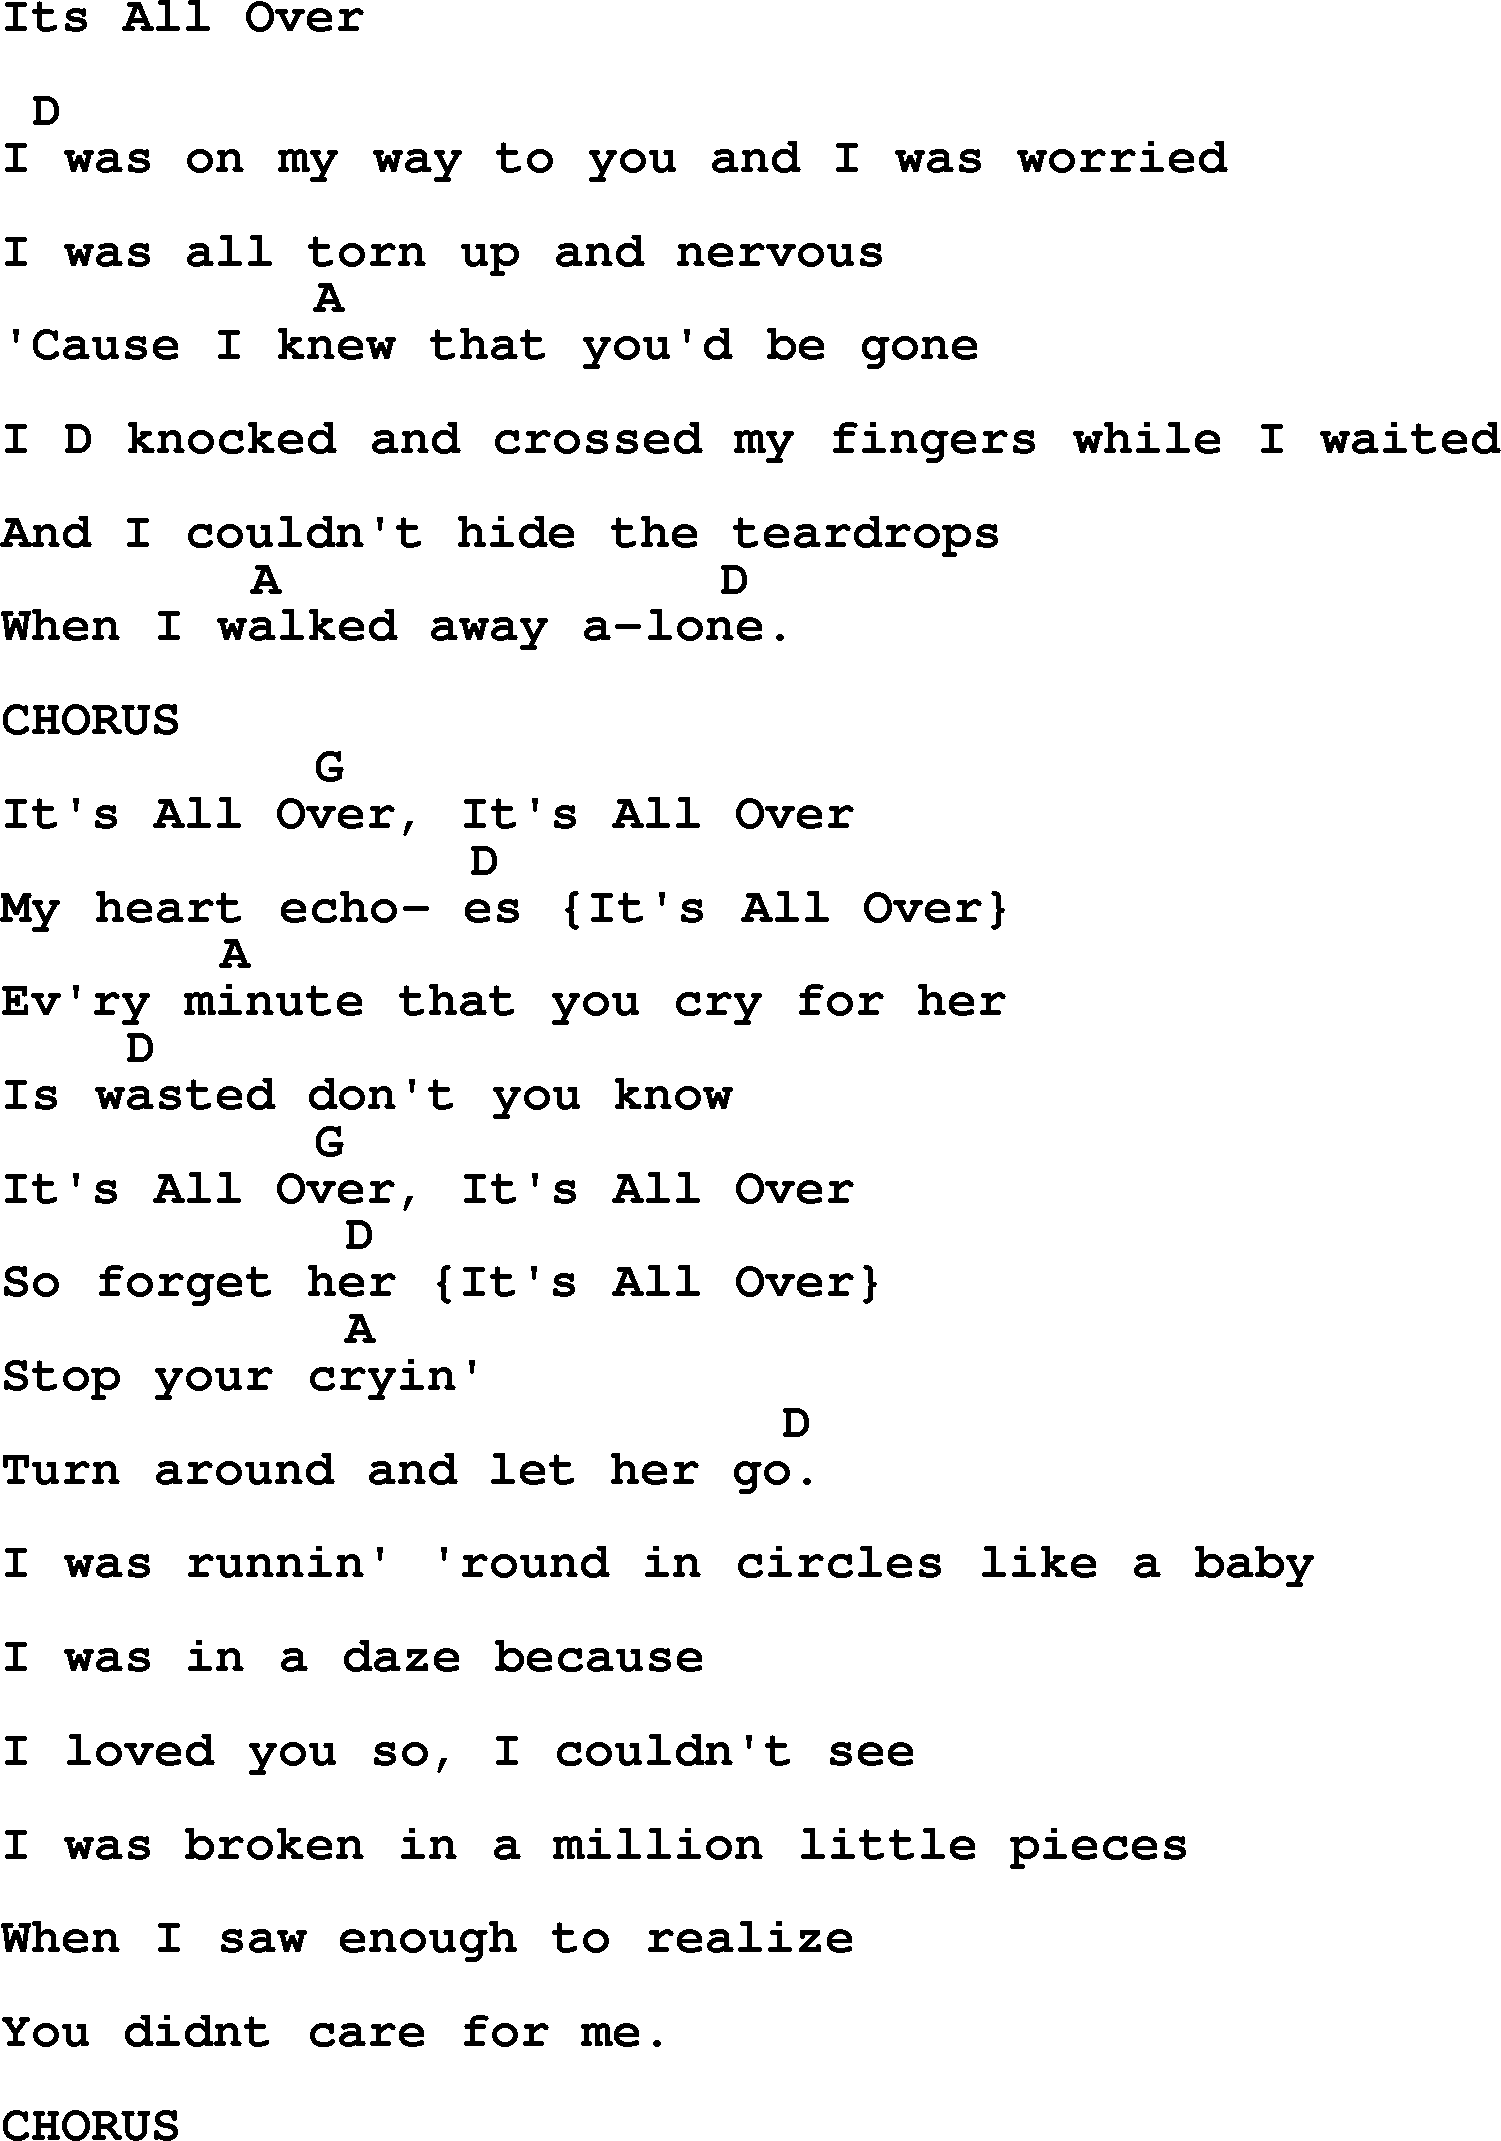 Johnny Cash song Its All Over, lyrics and chords